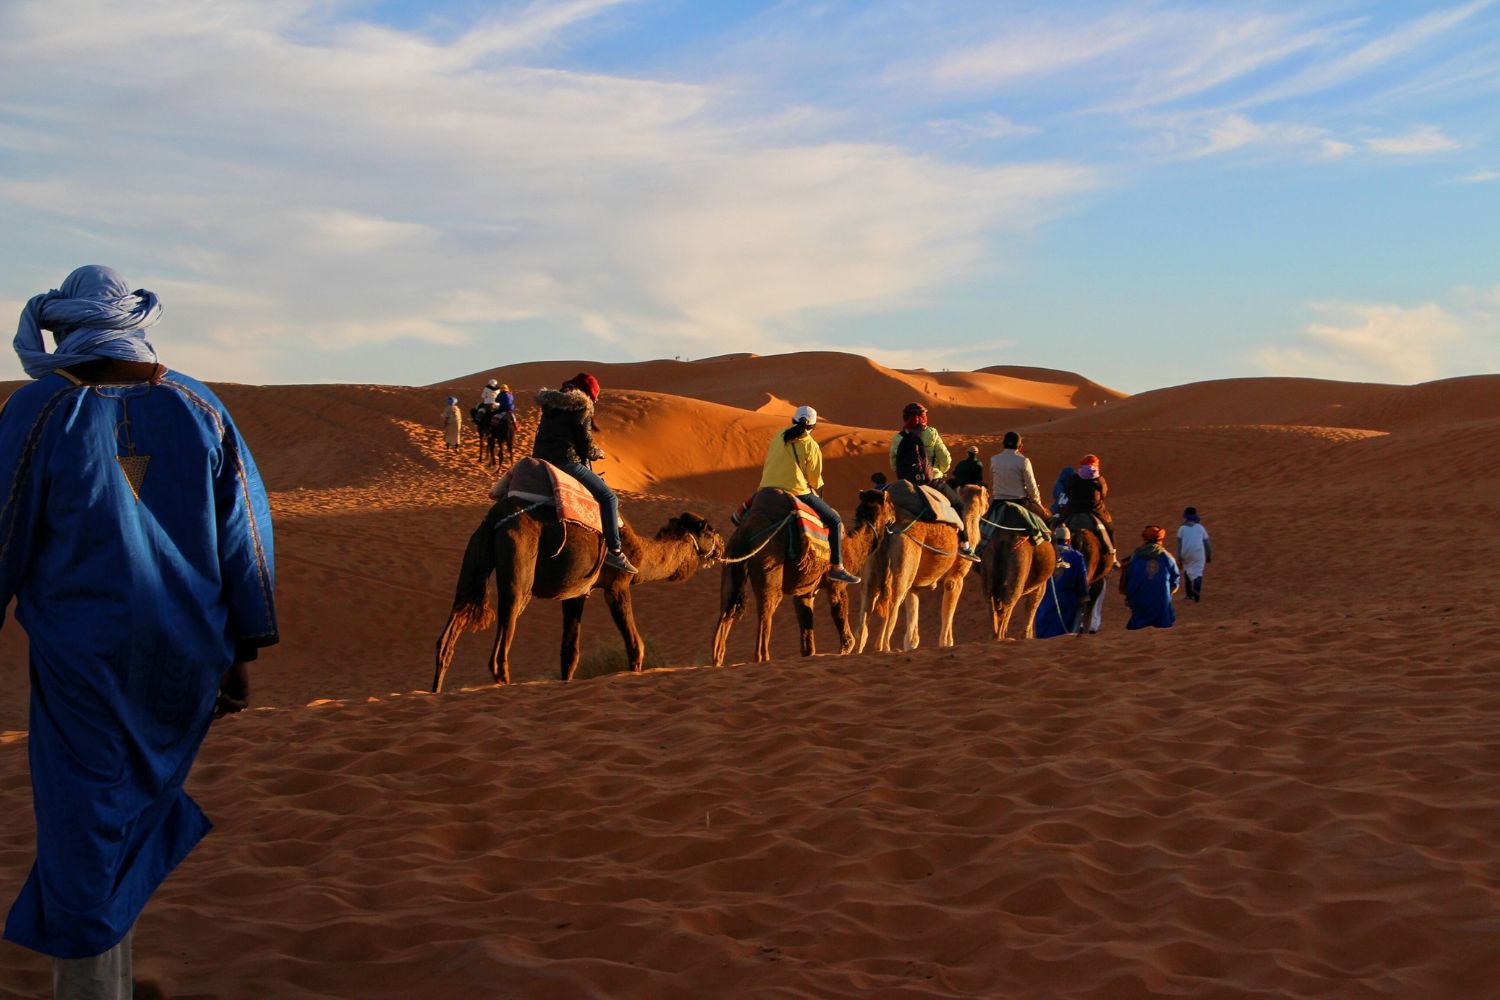 A group of tourists enjoying the Camel Adventure in the Sahara desert